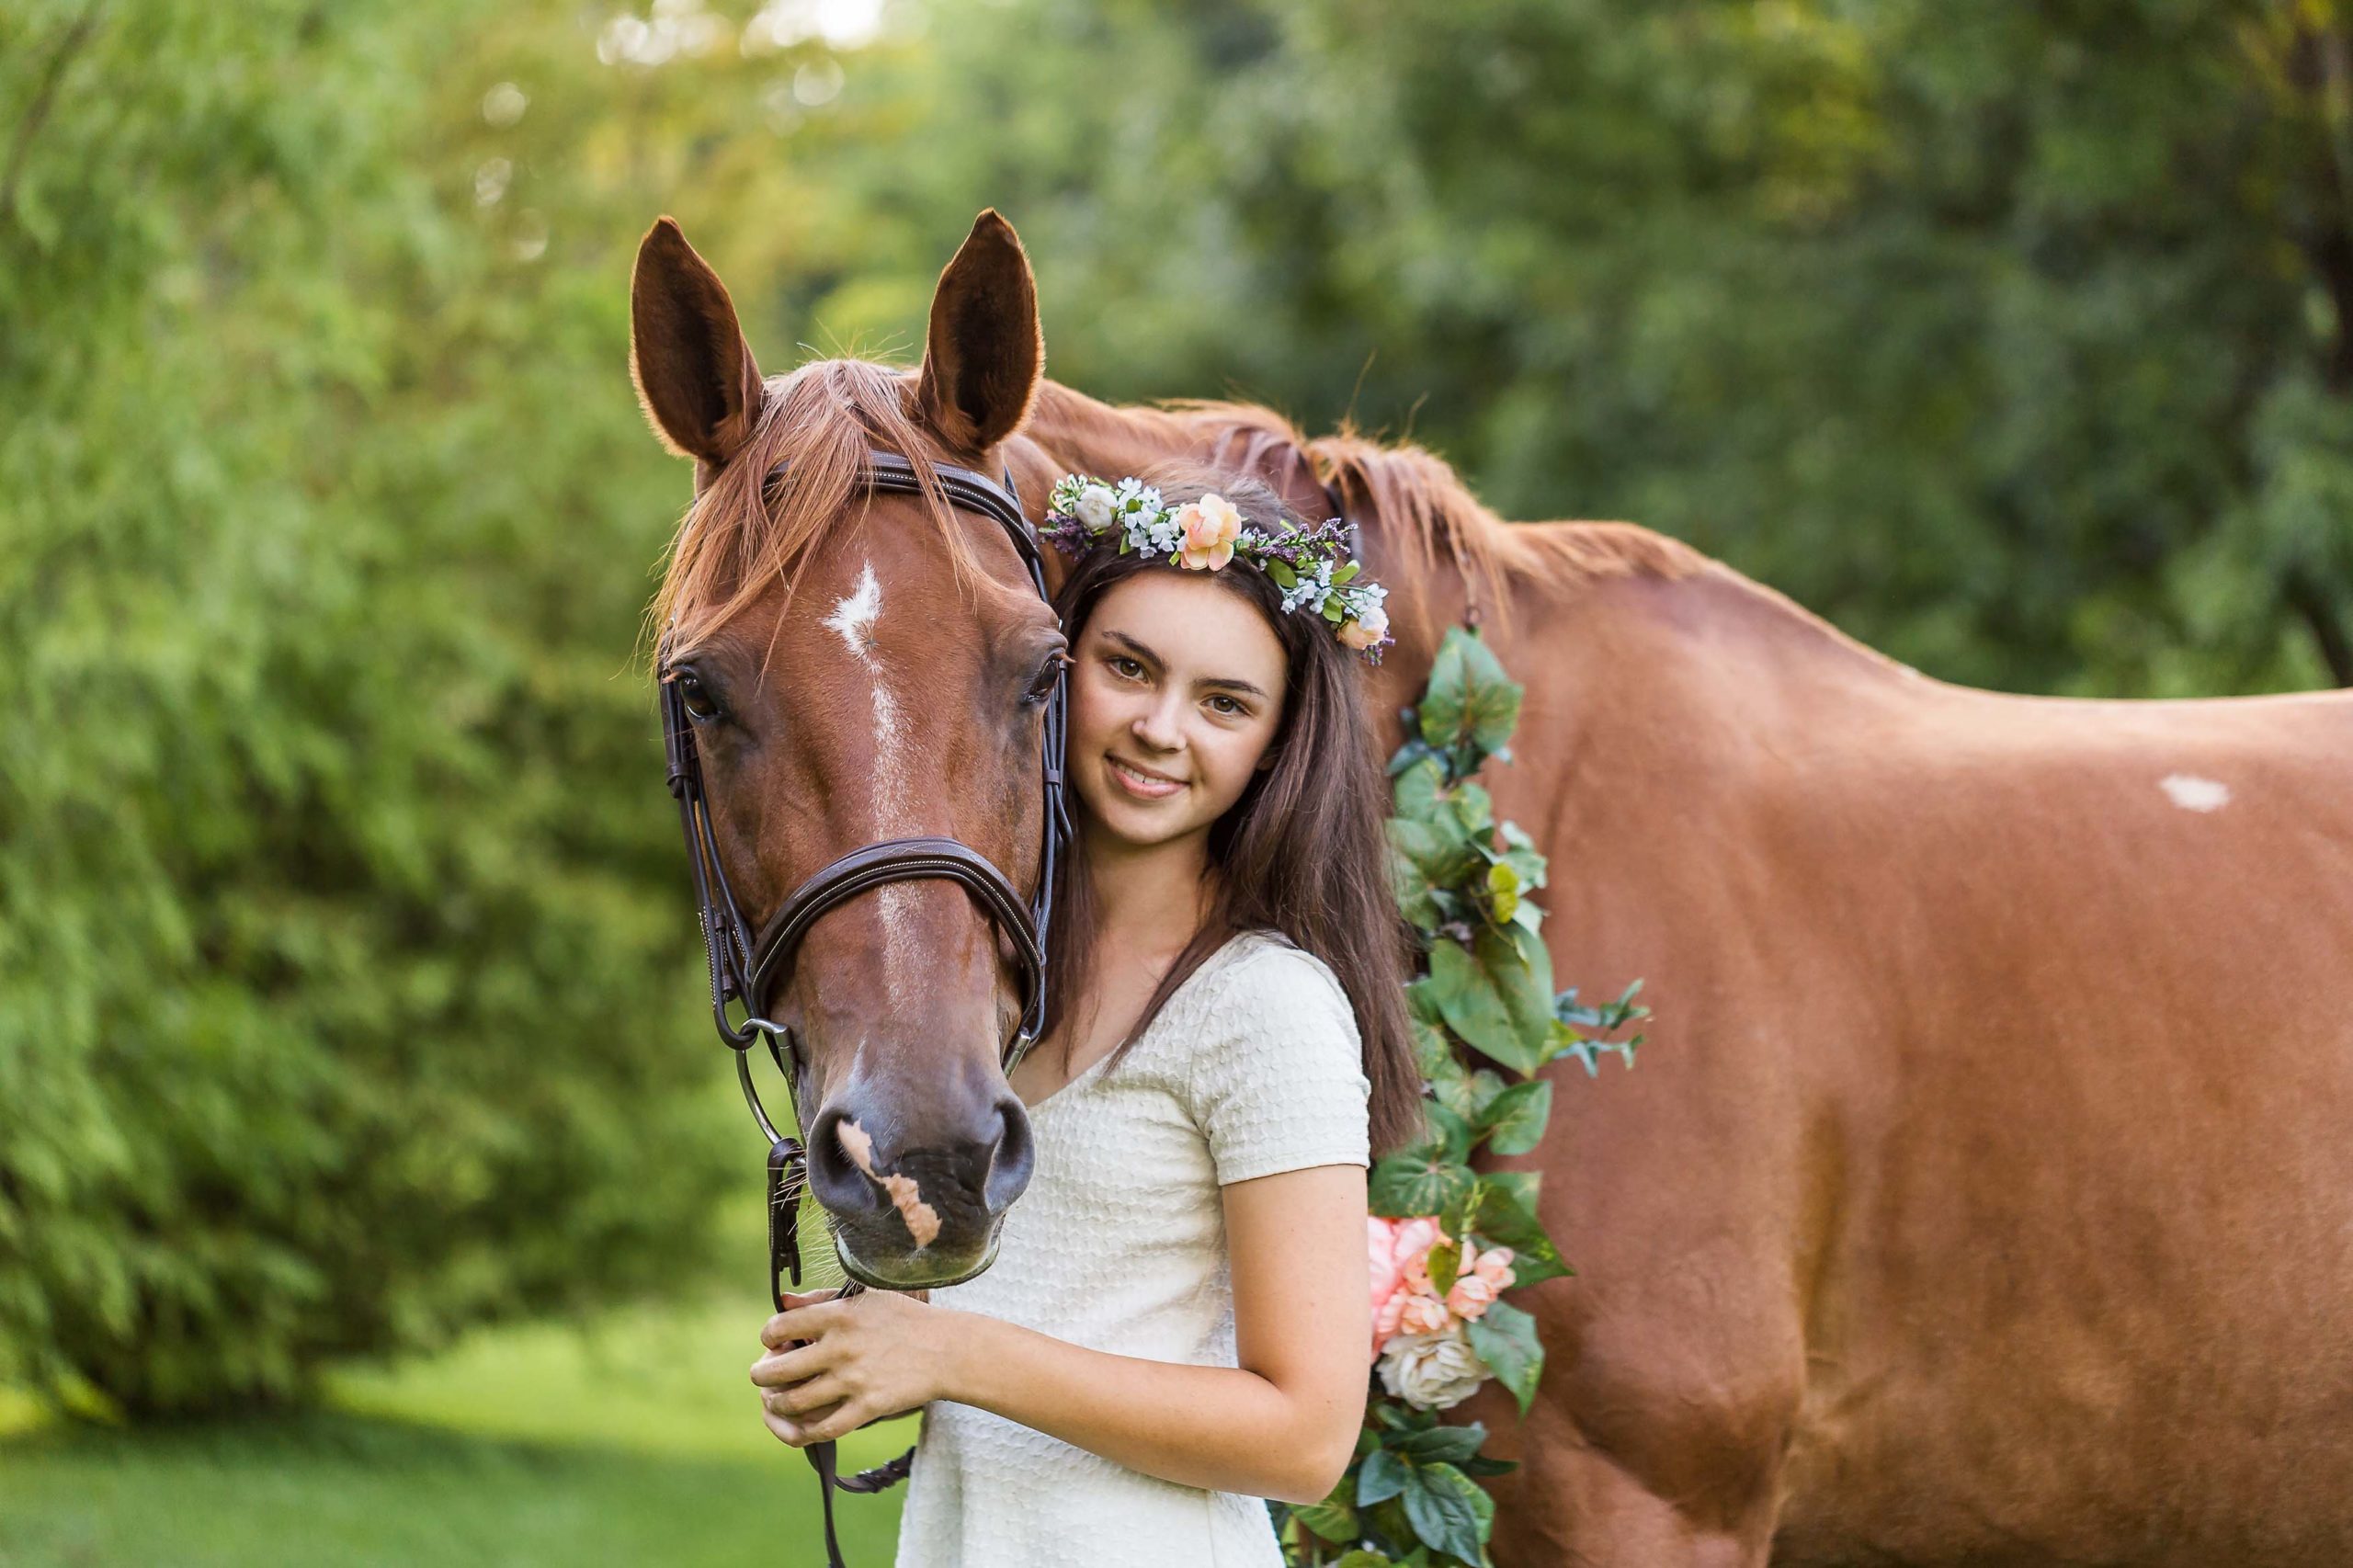 girl with flowers in hair with chestnut horse